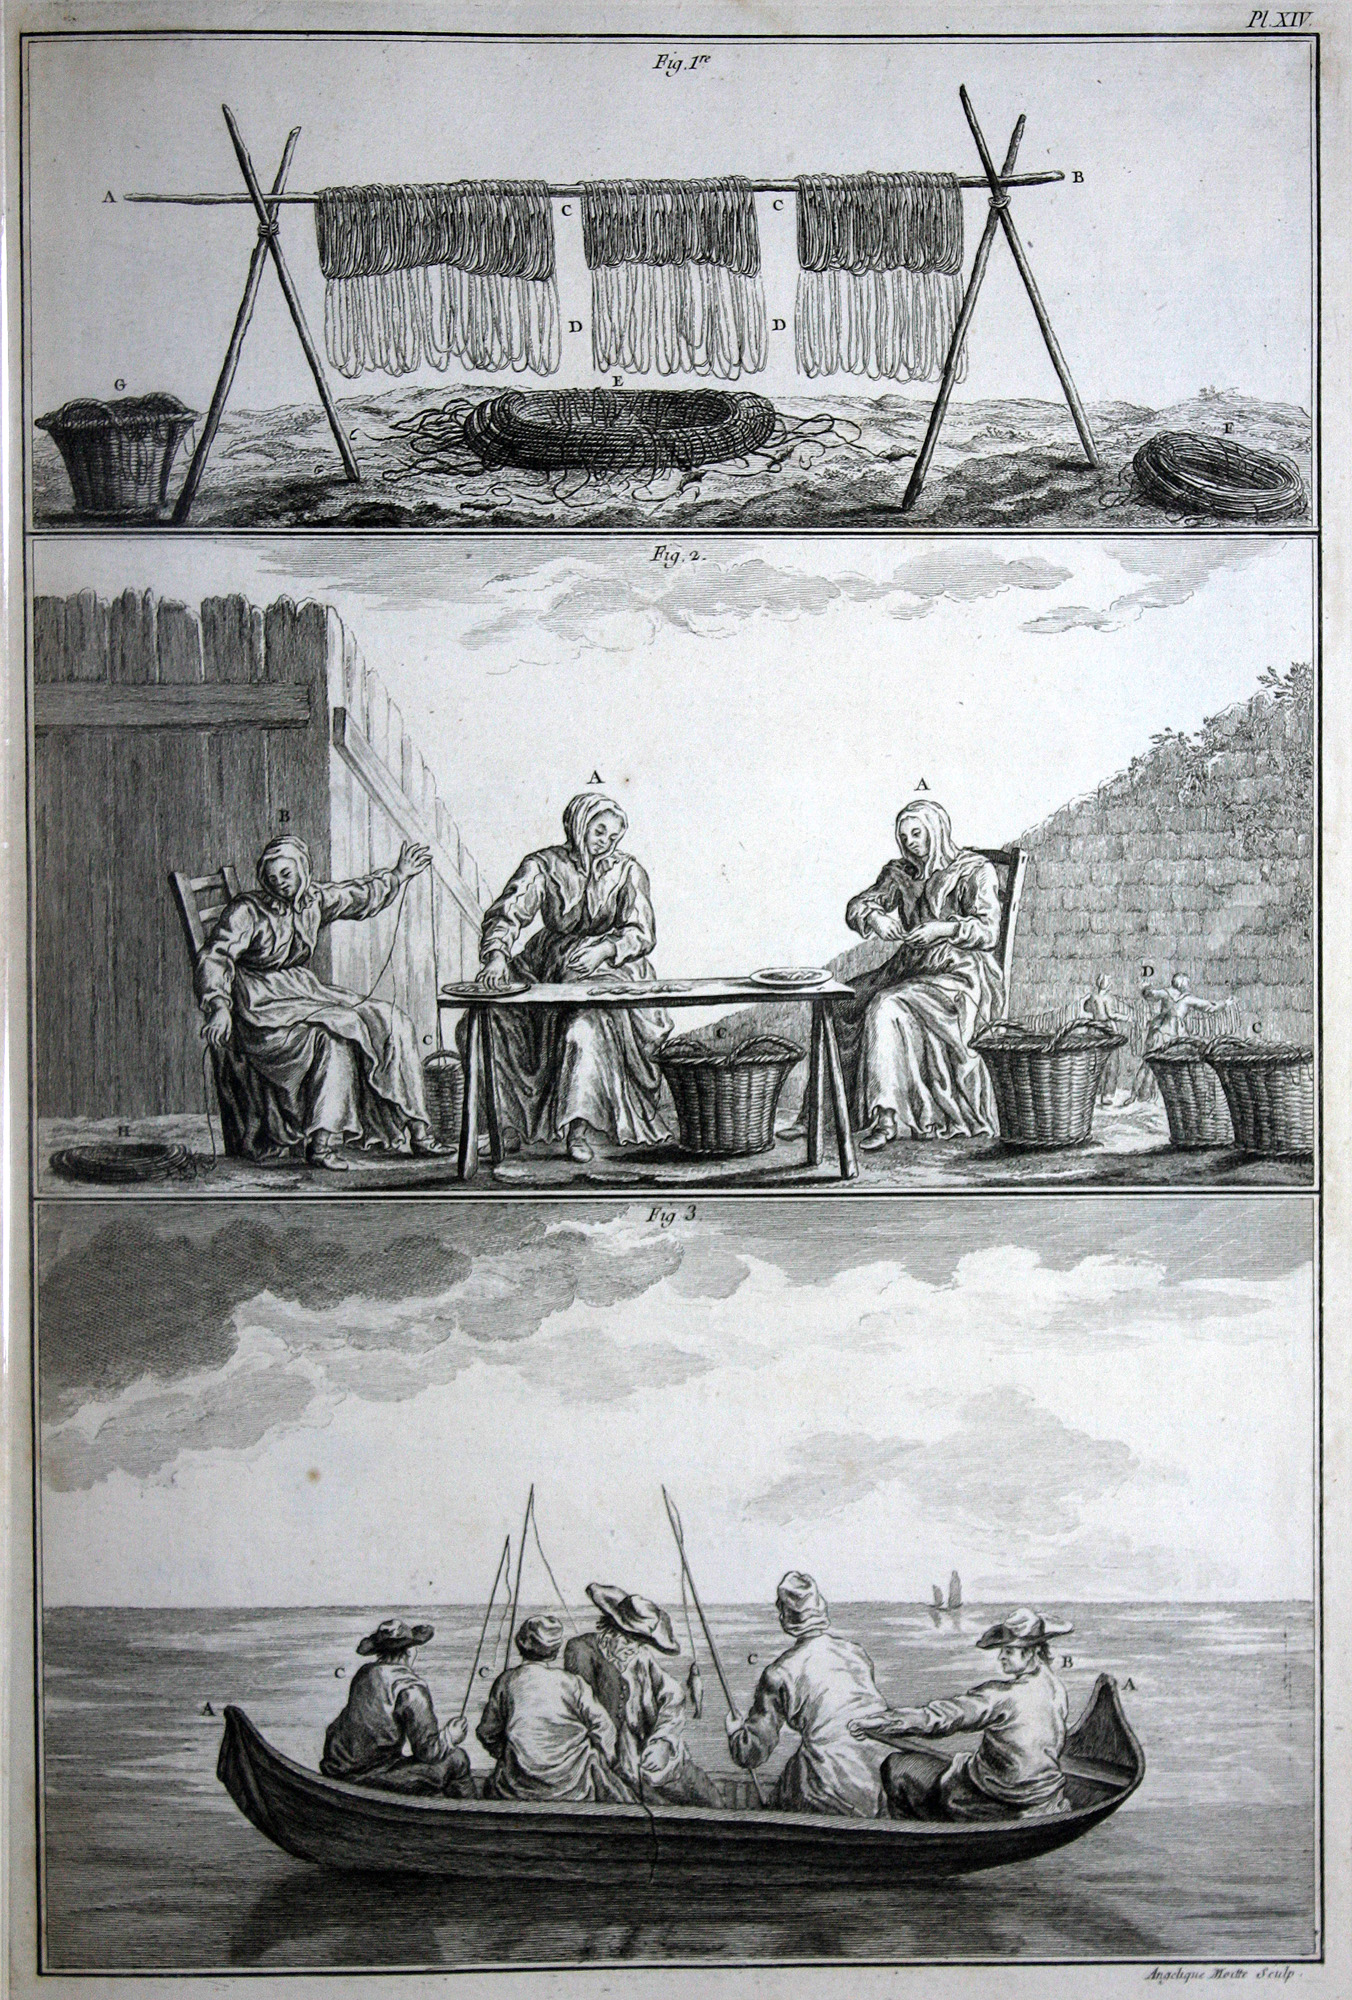 File:Women repairing fishing gear, and a small boat filled with fishermen  (13971854584).jpg - Wikimedia Commons